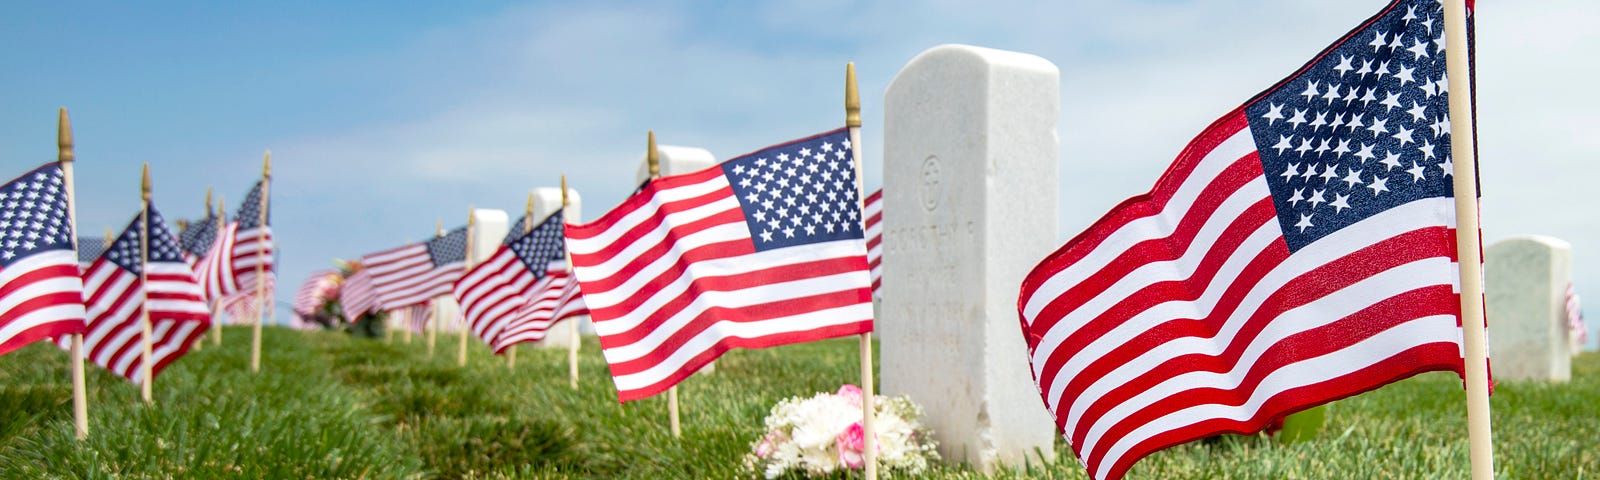 A color photo shows a row of white marble military-style headstones, each decorated with a miniature U.S. flag sticking out of the ground in front of it.